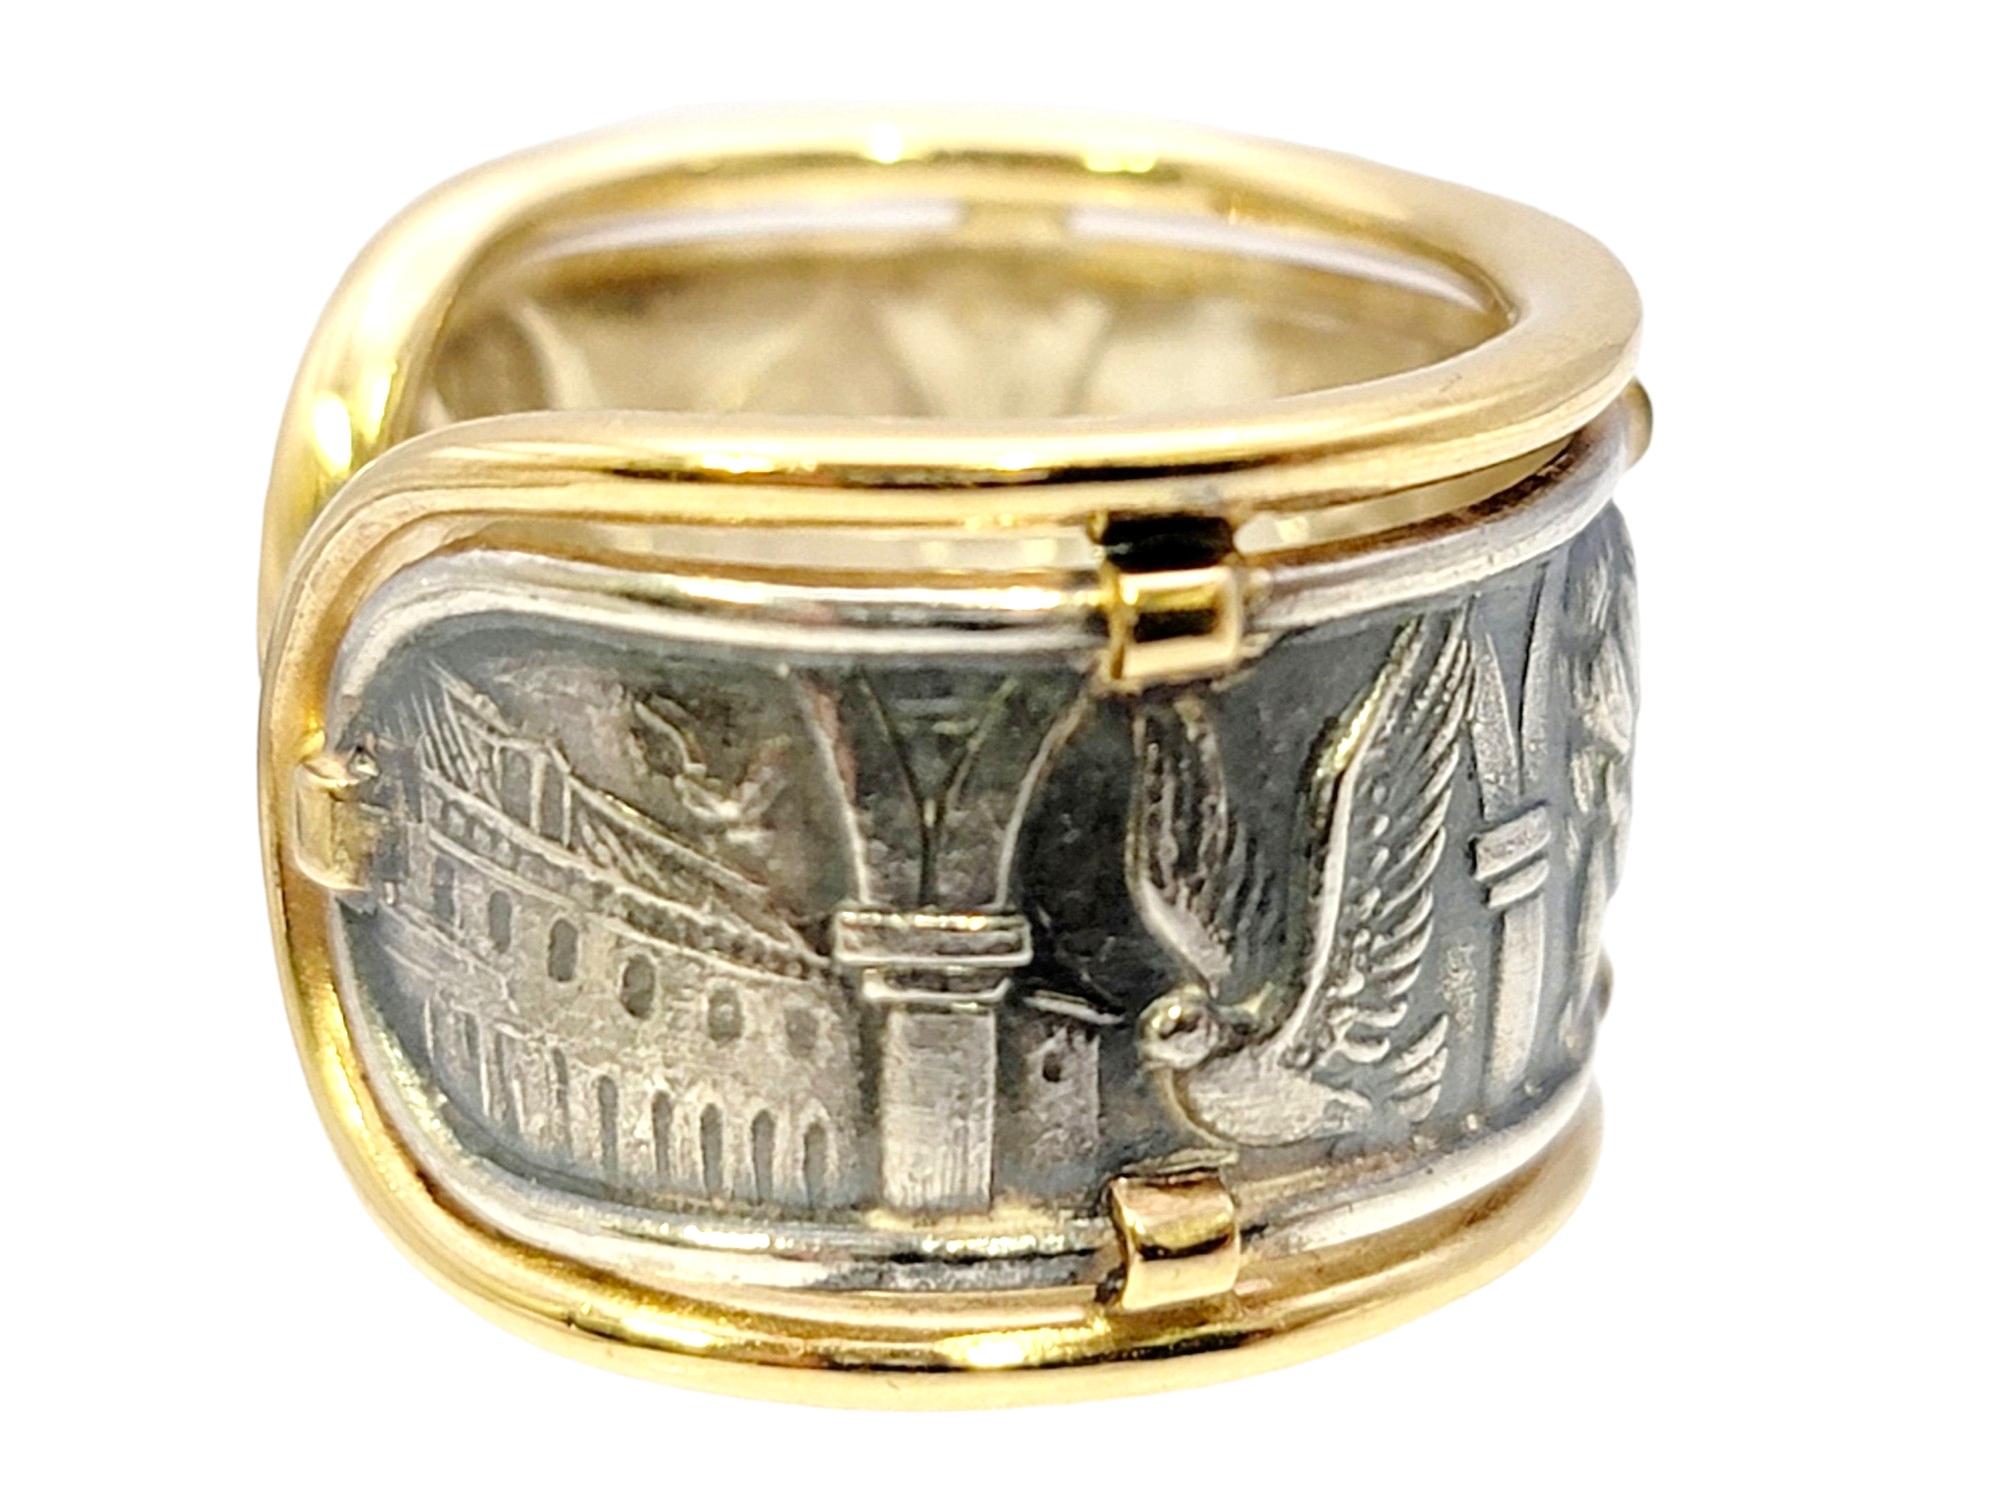 Contemporary Carrera Y Carrera Romeo & Juliet Band Ring in Sterling Silver and Yellow Gold 